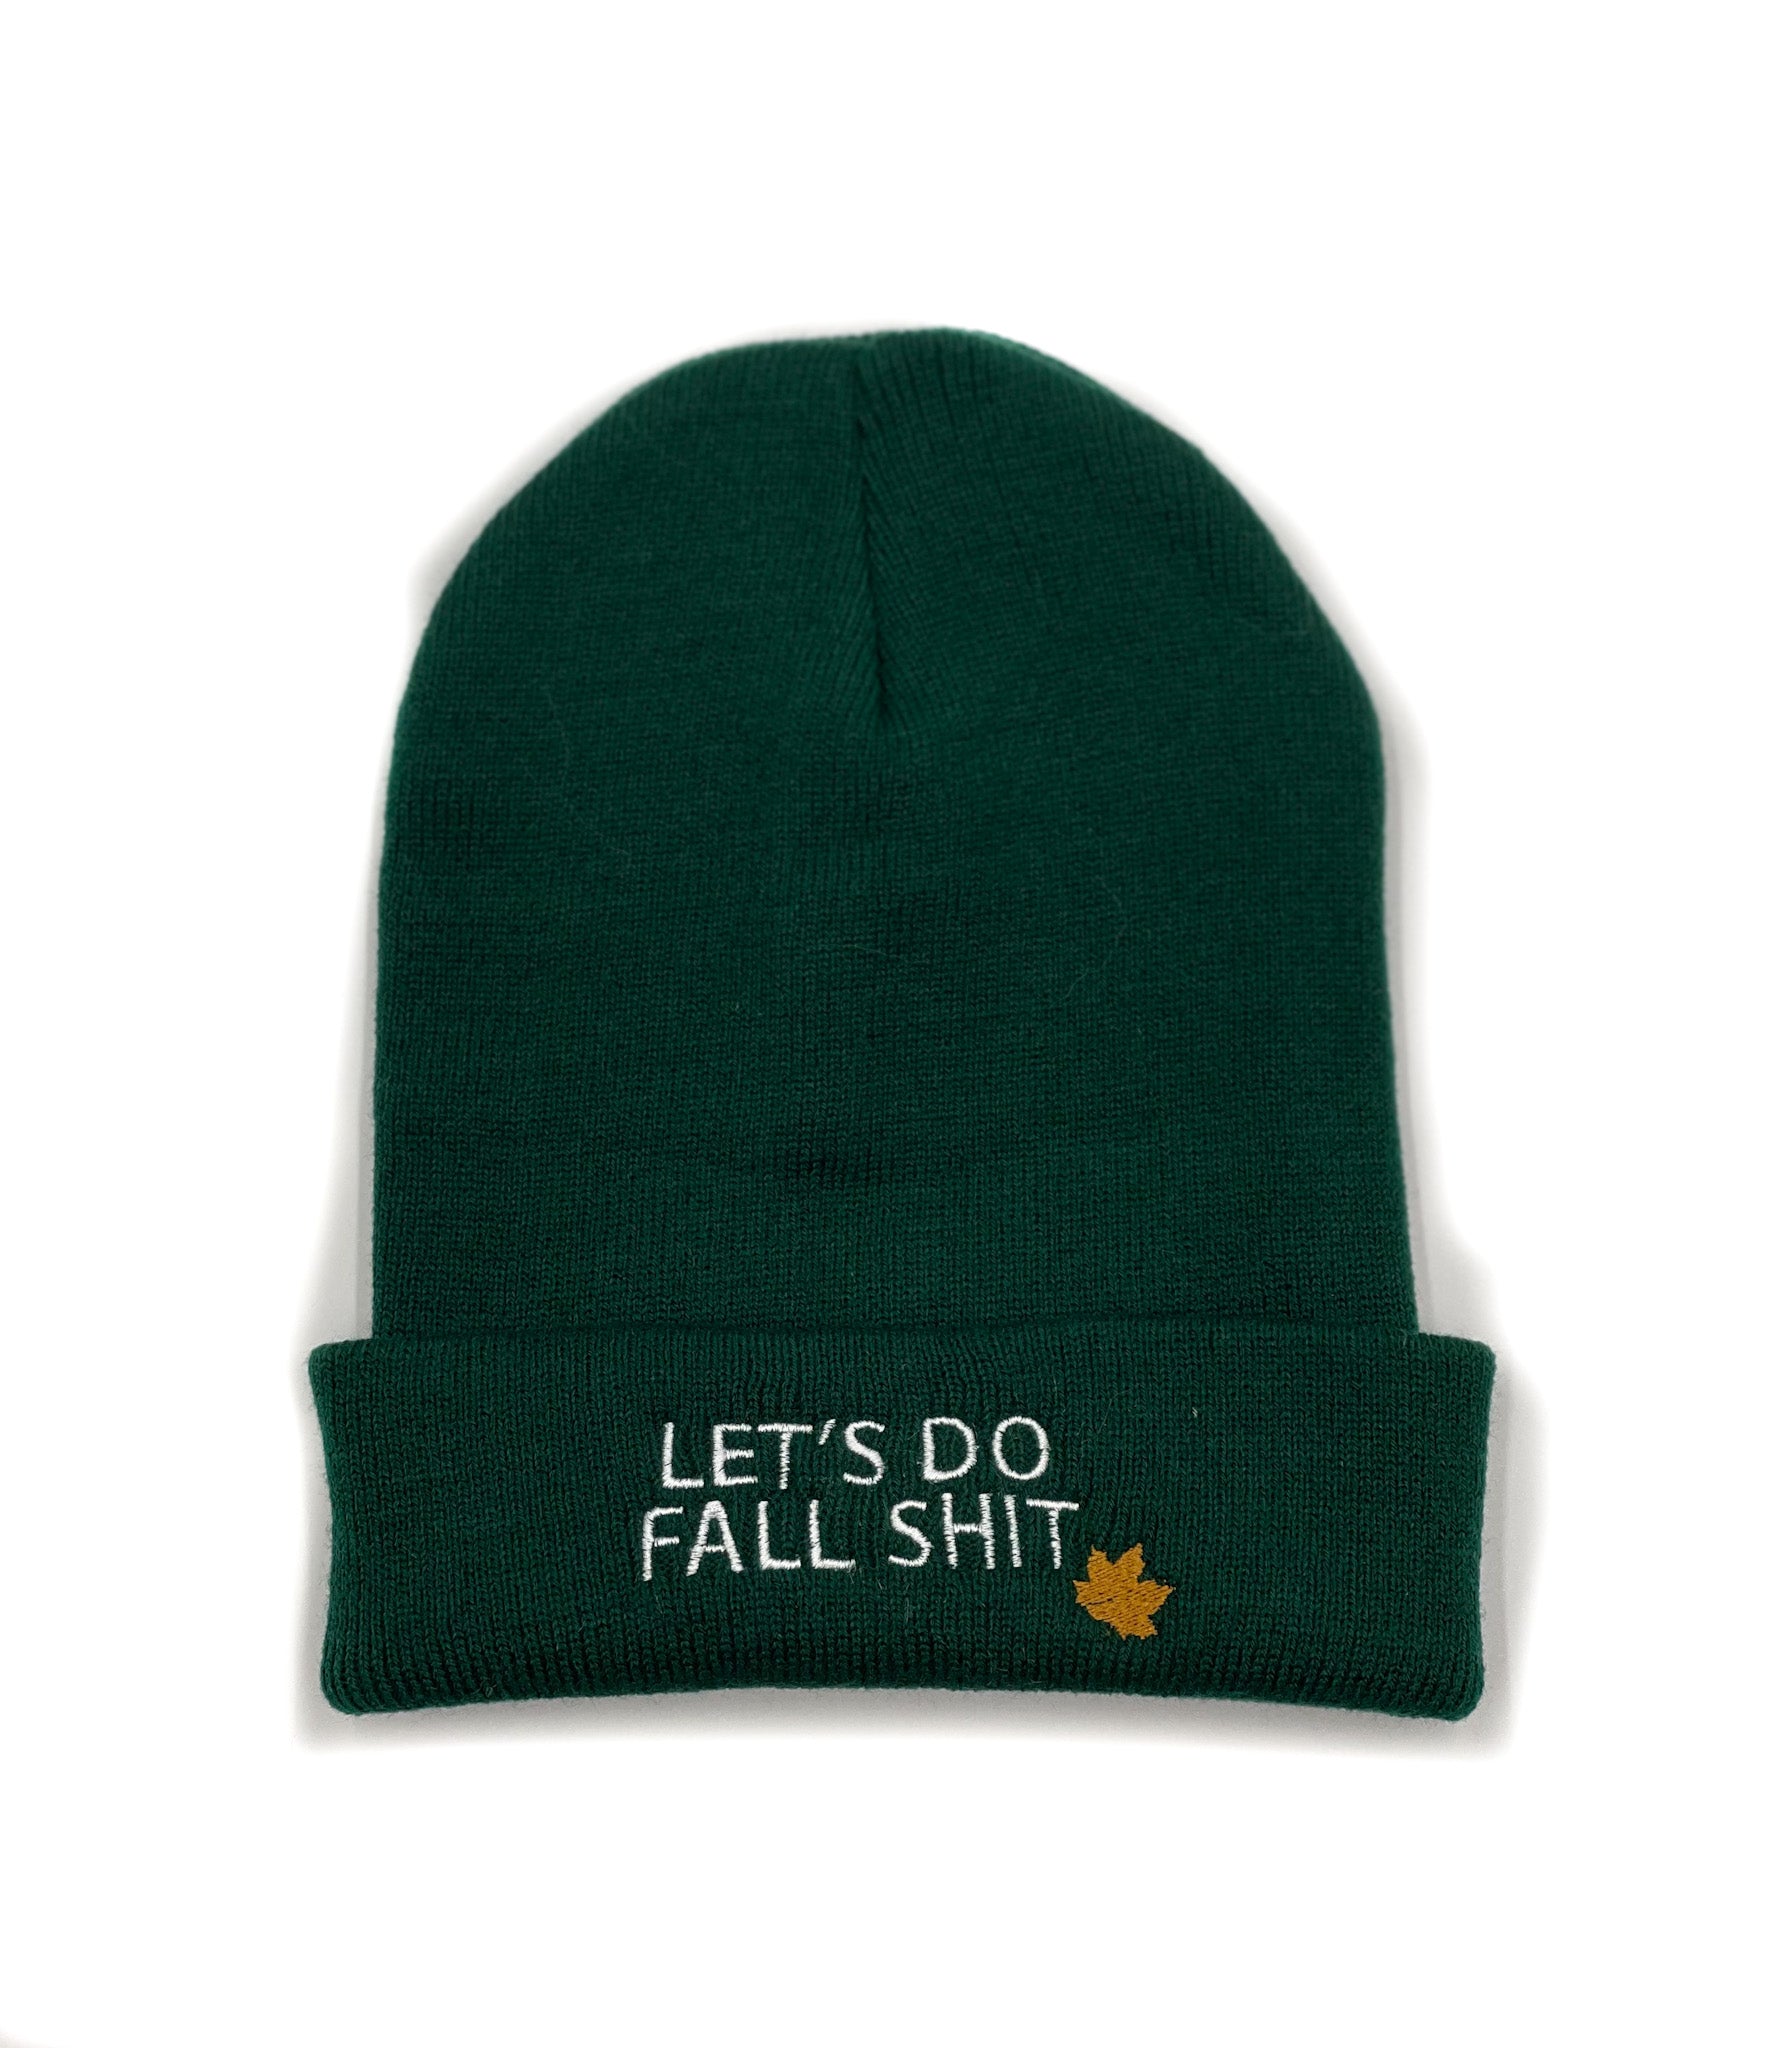 FALL SHIT EMBROIDERED BEANIE